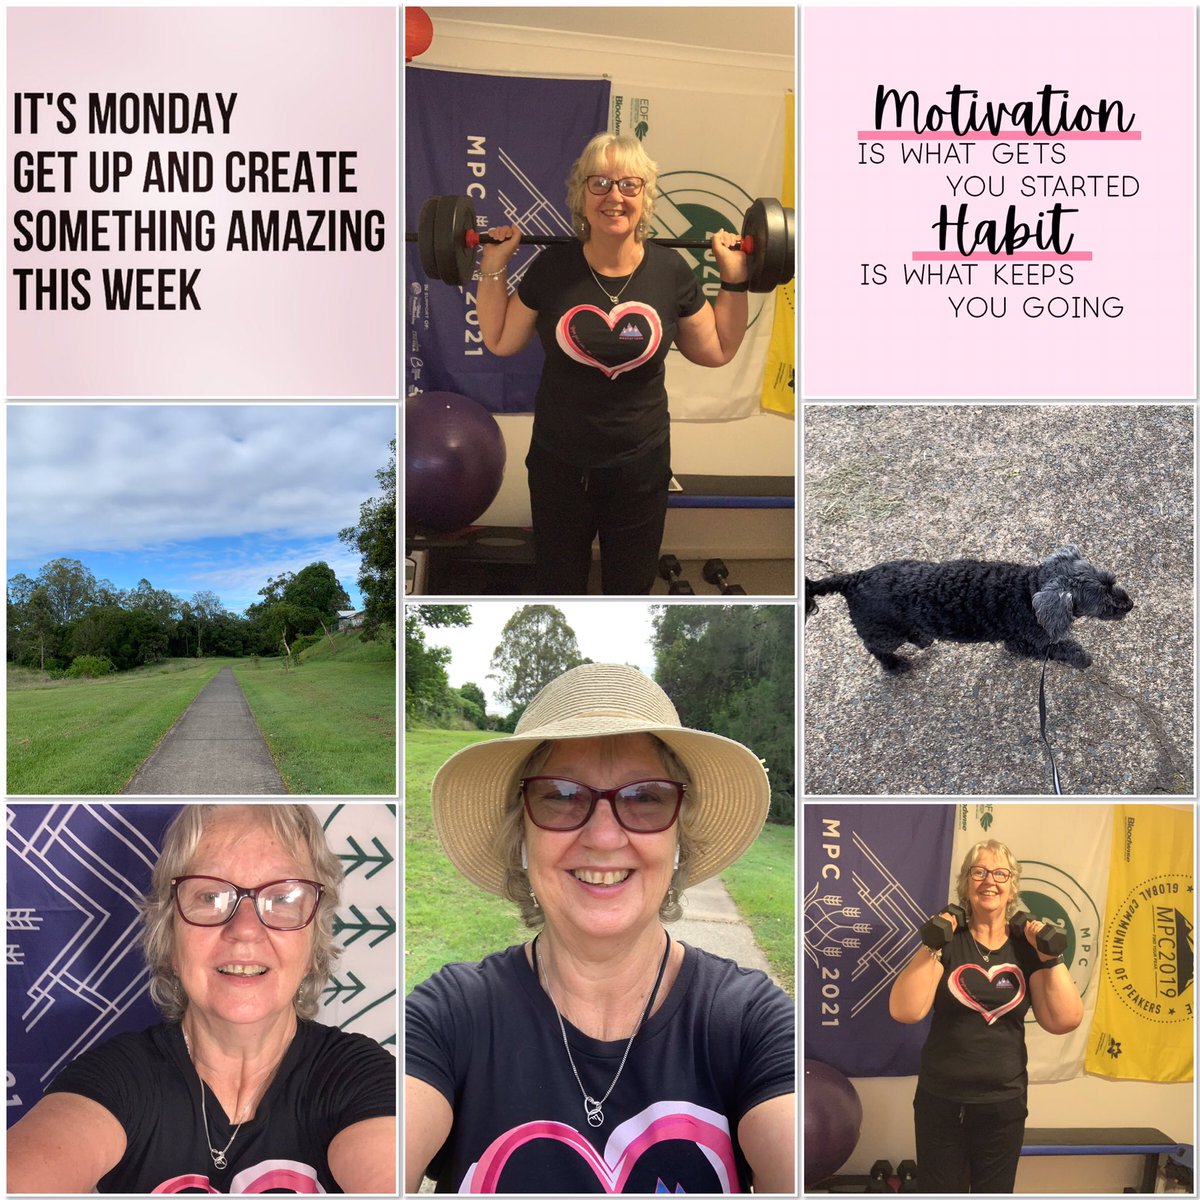 Last week of Month 11 started with C4S1 done ✅ plus a 3k walk with Boofy #dogsofmpc  then a quick chat with #aussiepeakers Merryll and Heather before going for a coffee with Hubby and Danielle #motherdaughterpeakers #mpc2021 @SamHeughan @MyPeakChallenge @CoachValbo